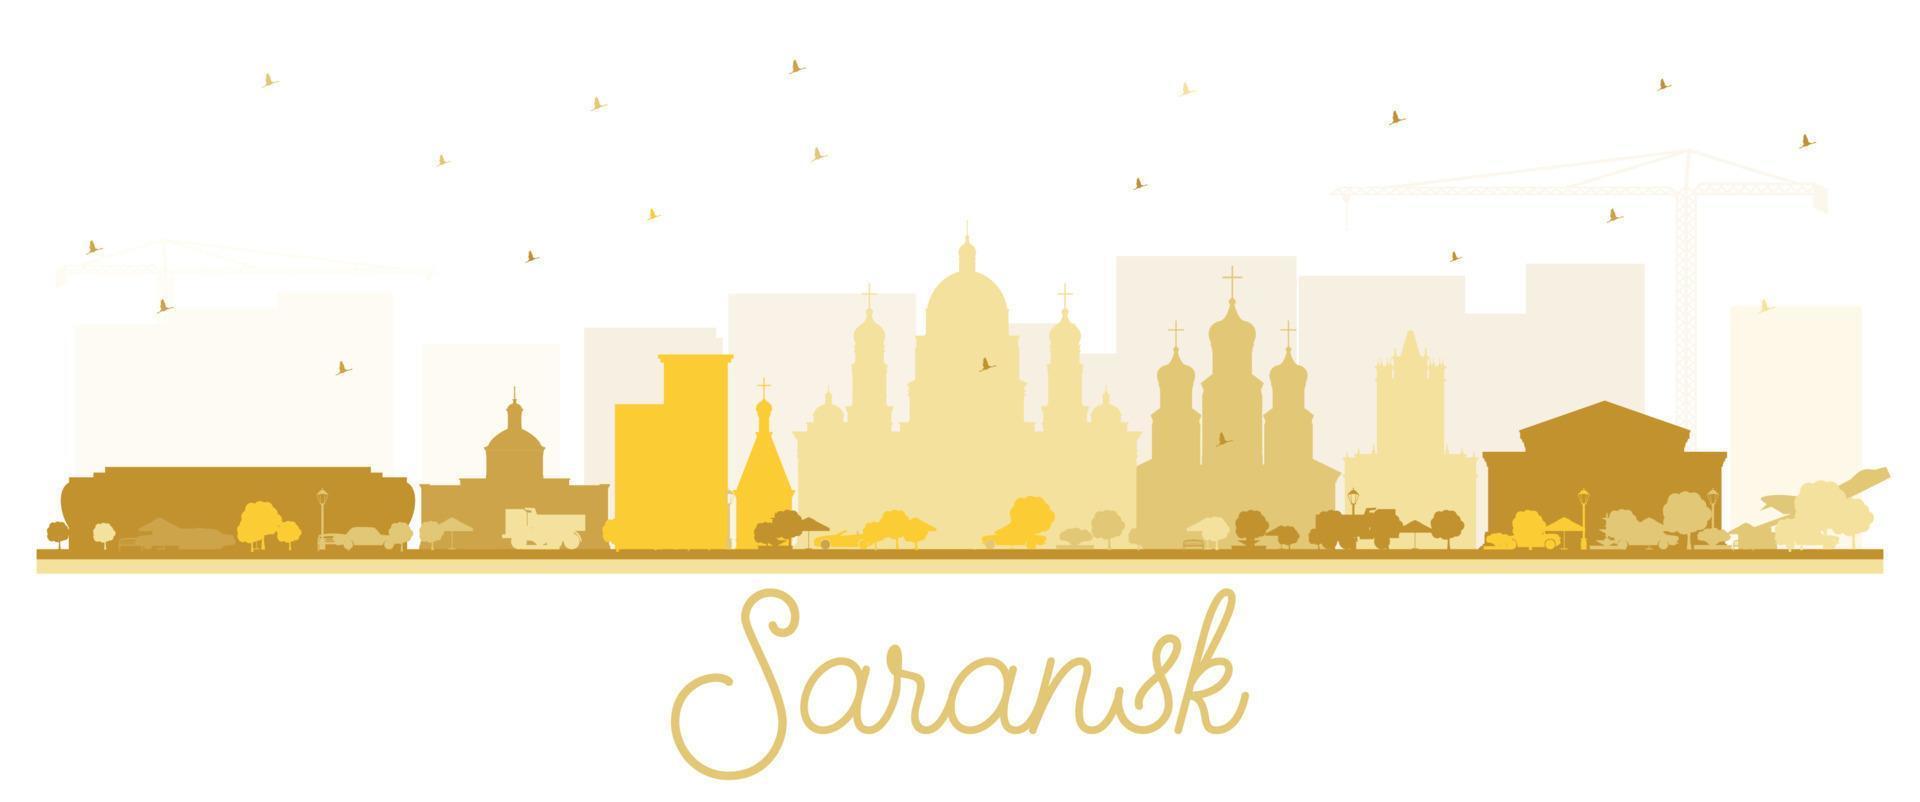 Saransk Russia City Skyline Silhouette with Golden Buildings Isolated on White. vector